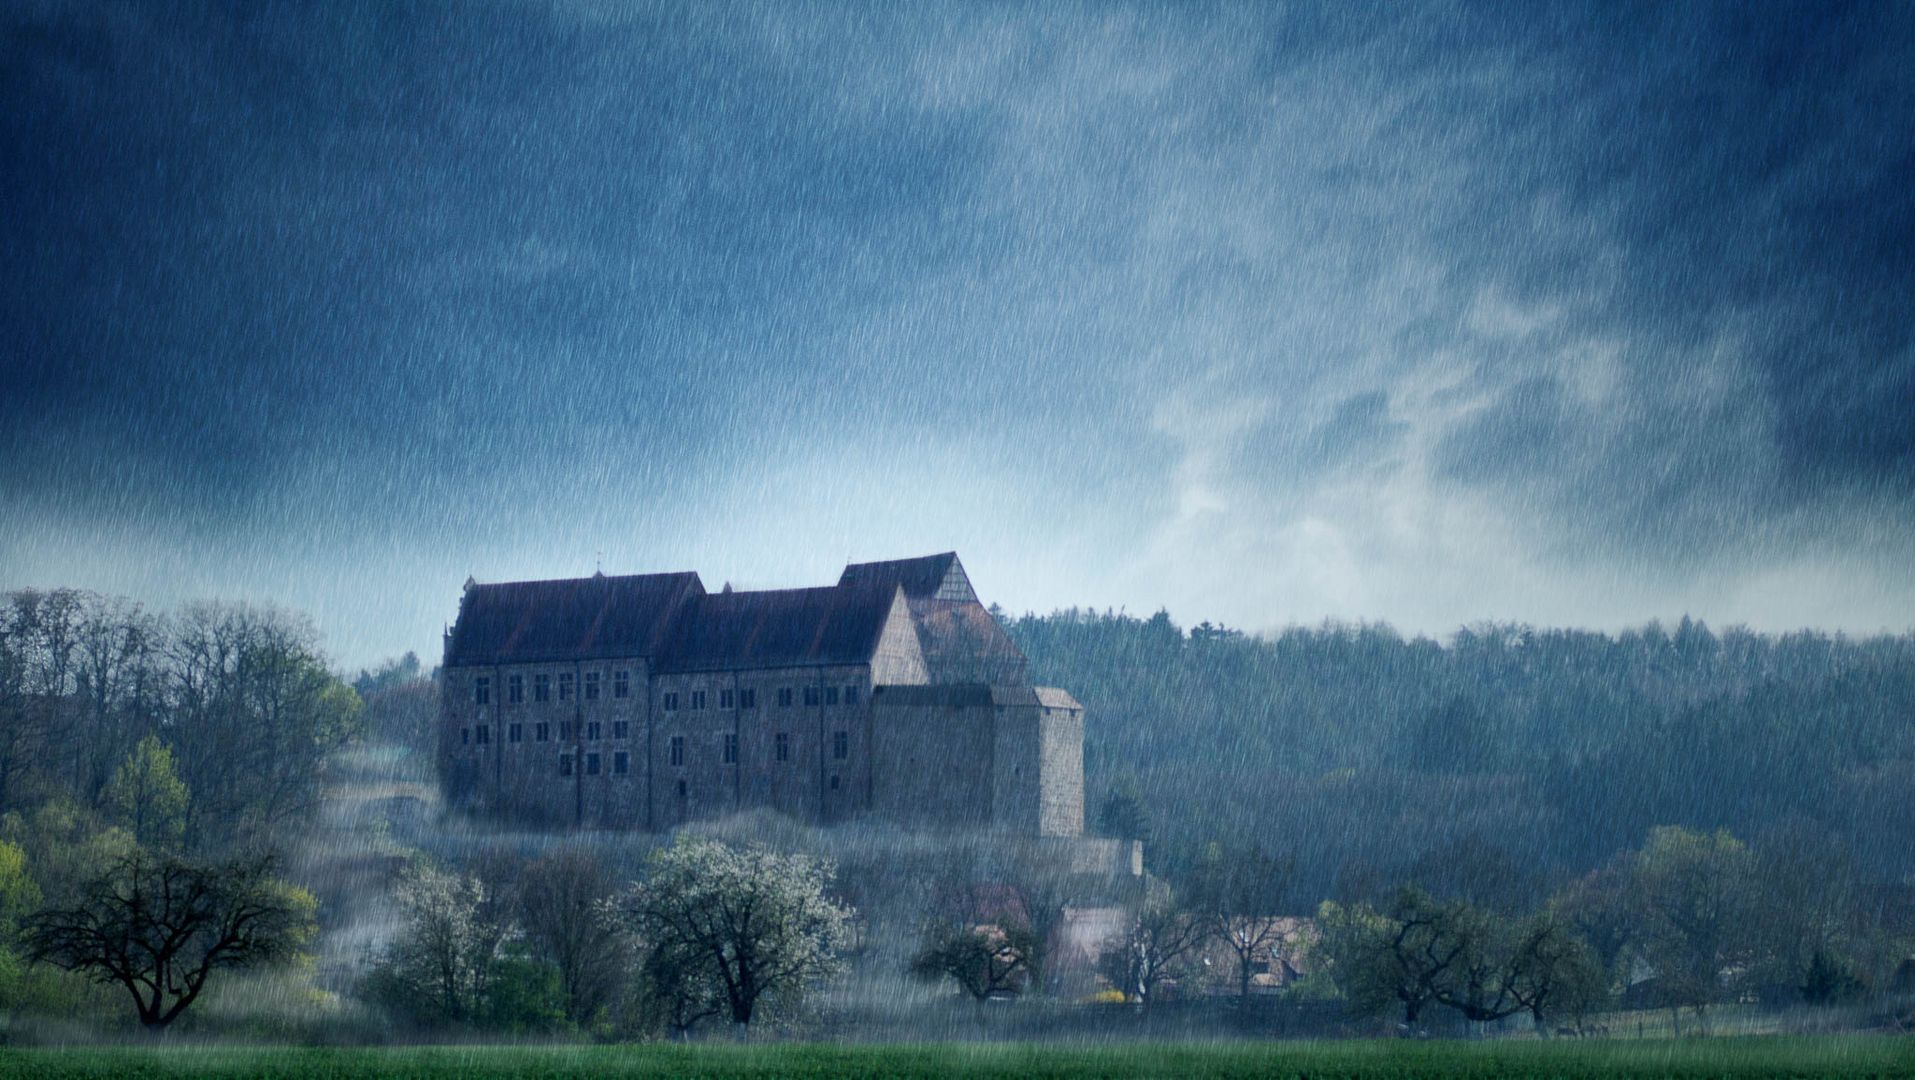 The Castle Cadolzburg